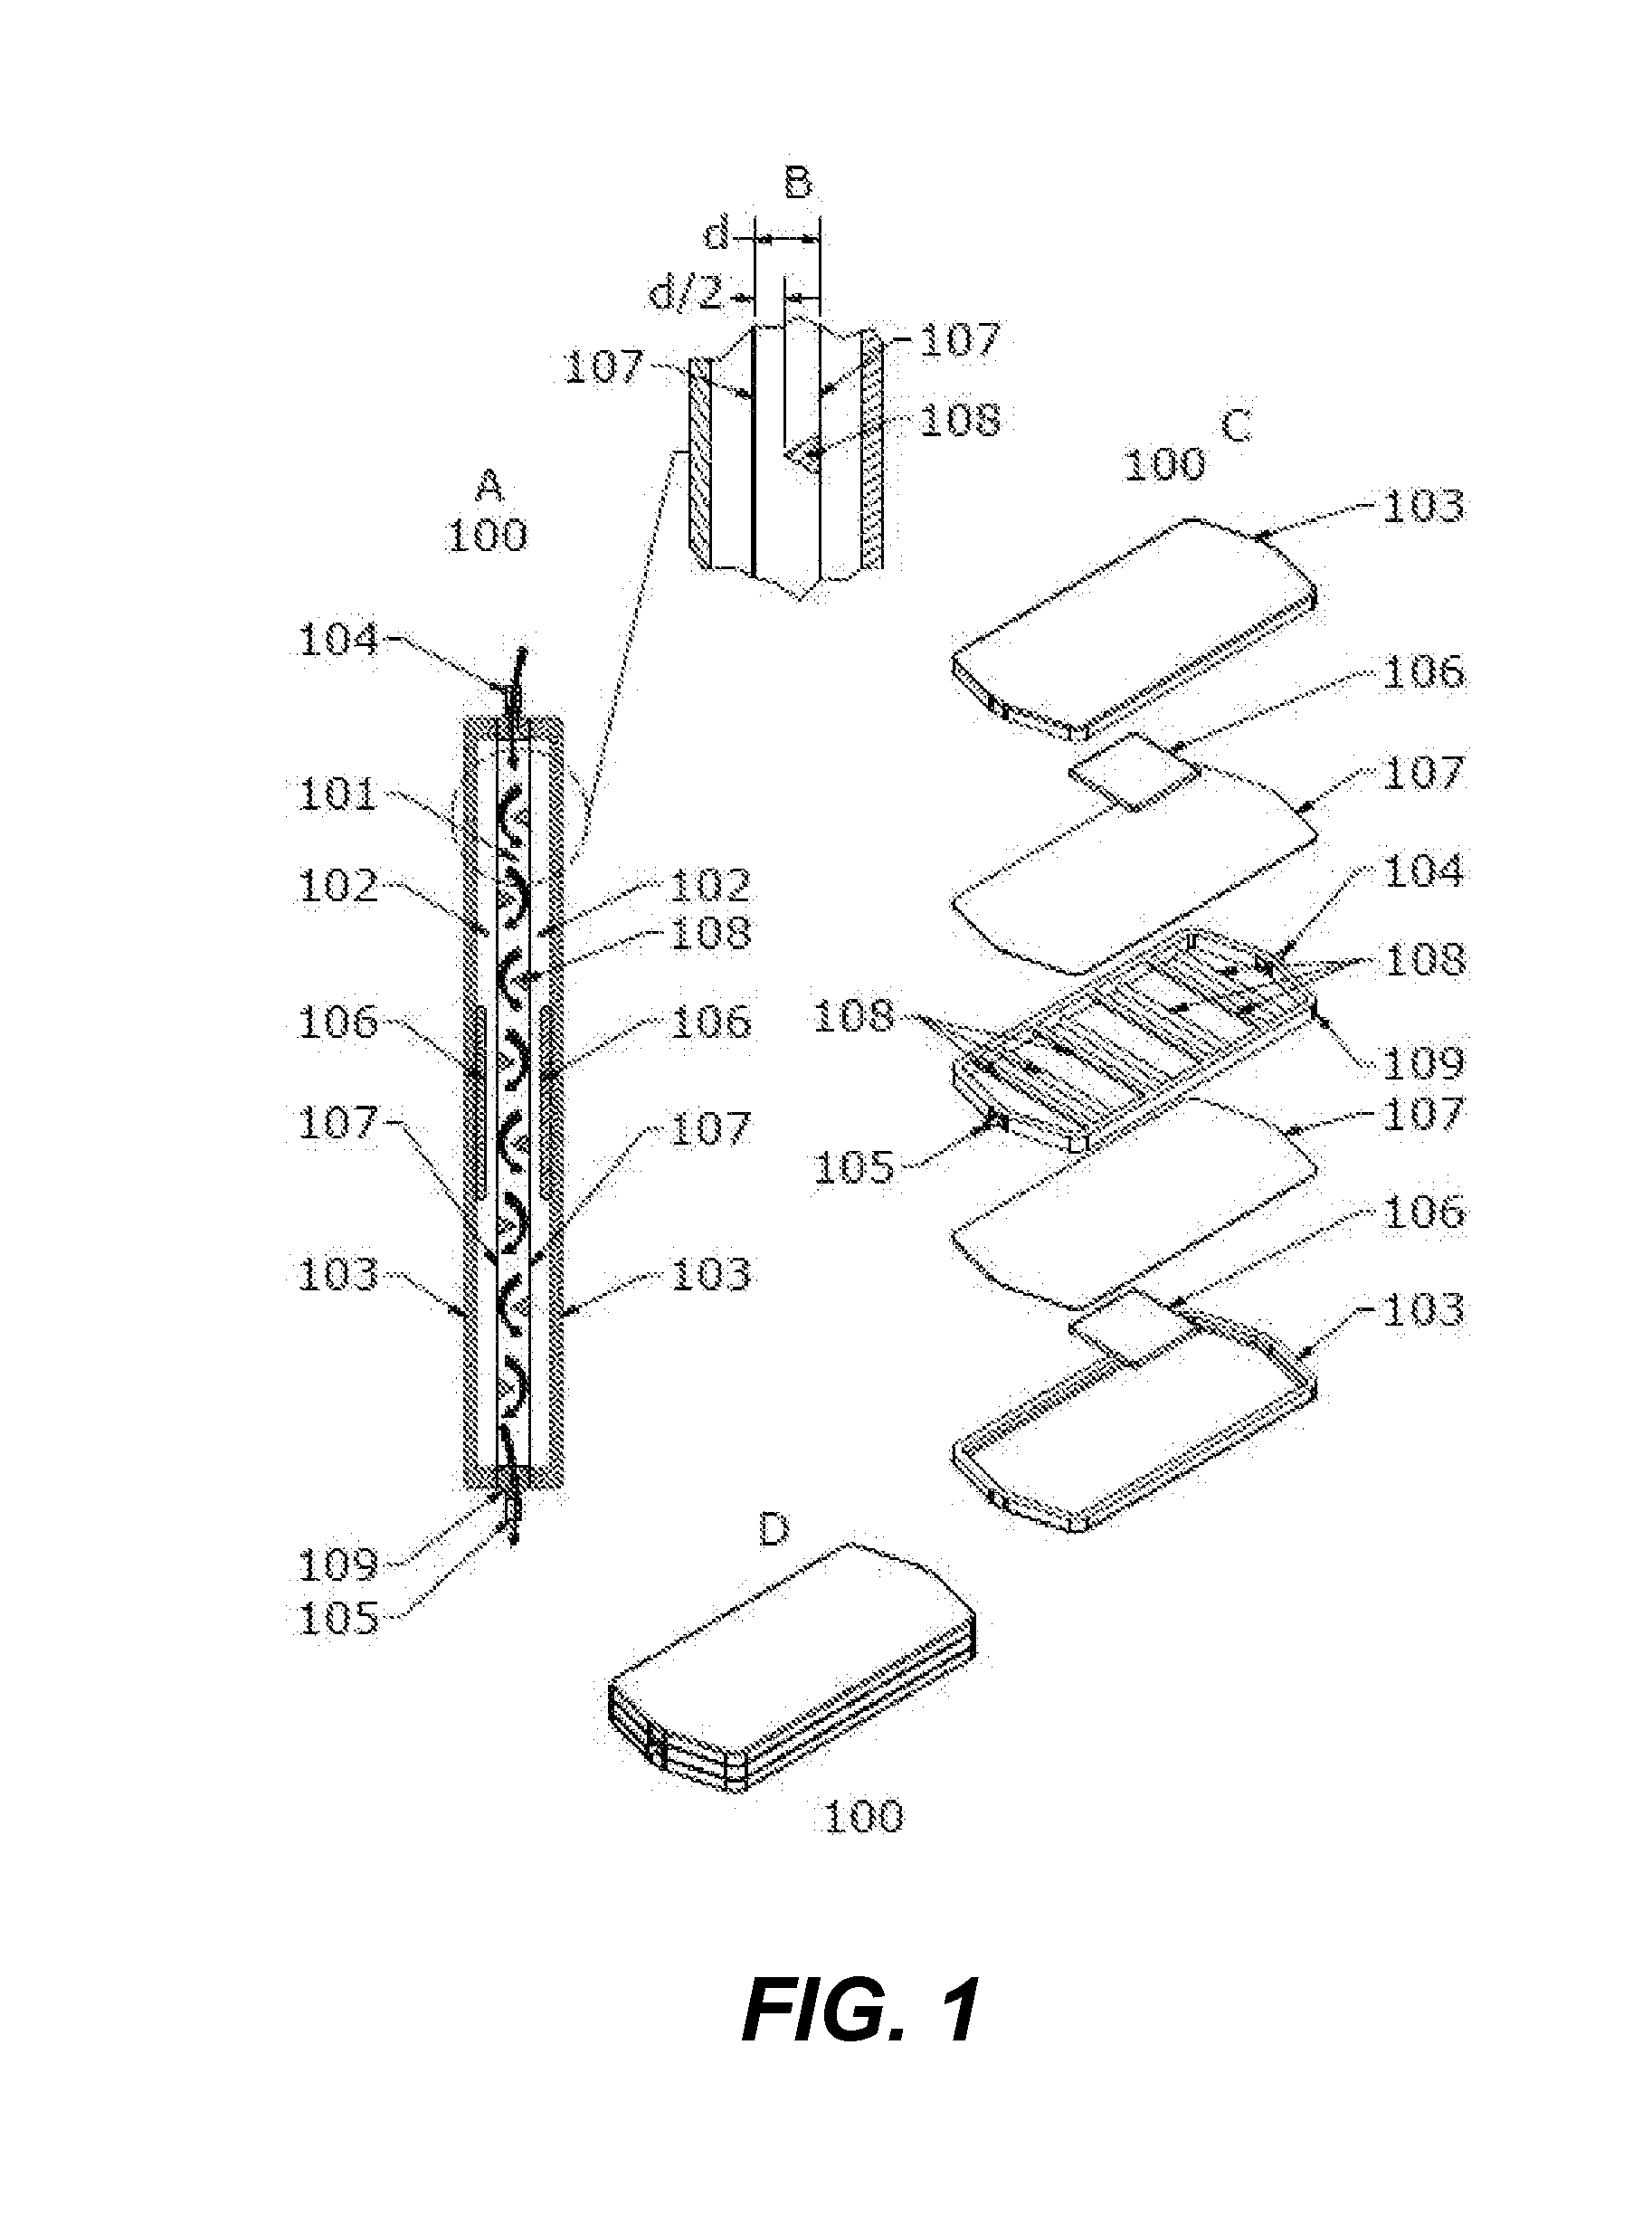 Gas depletion and gas addition devices for blood treatment